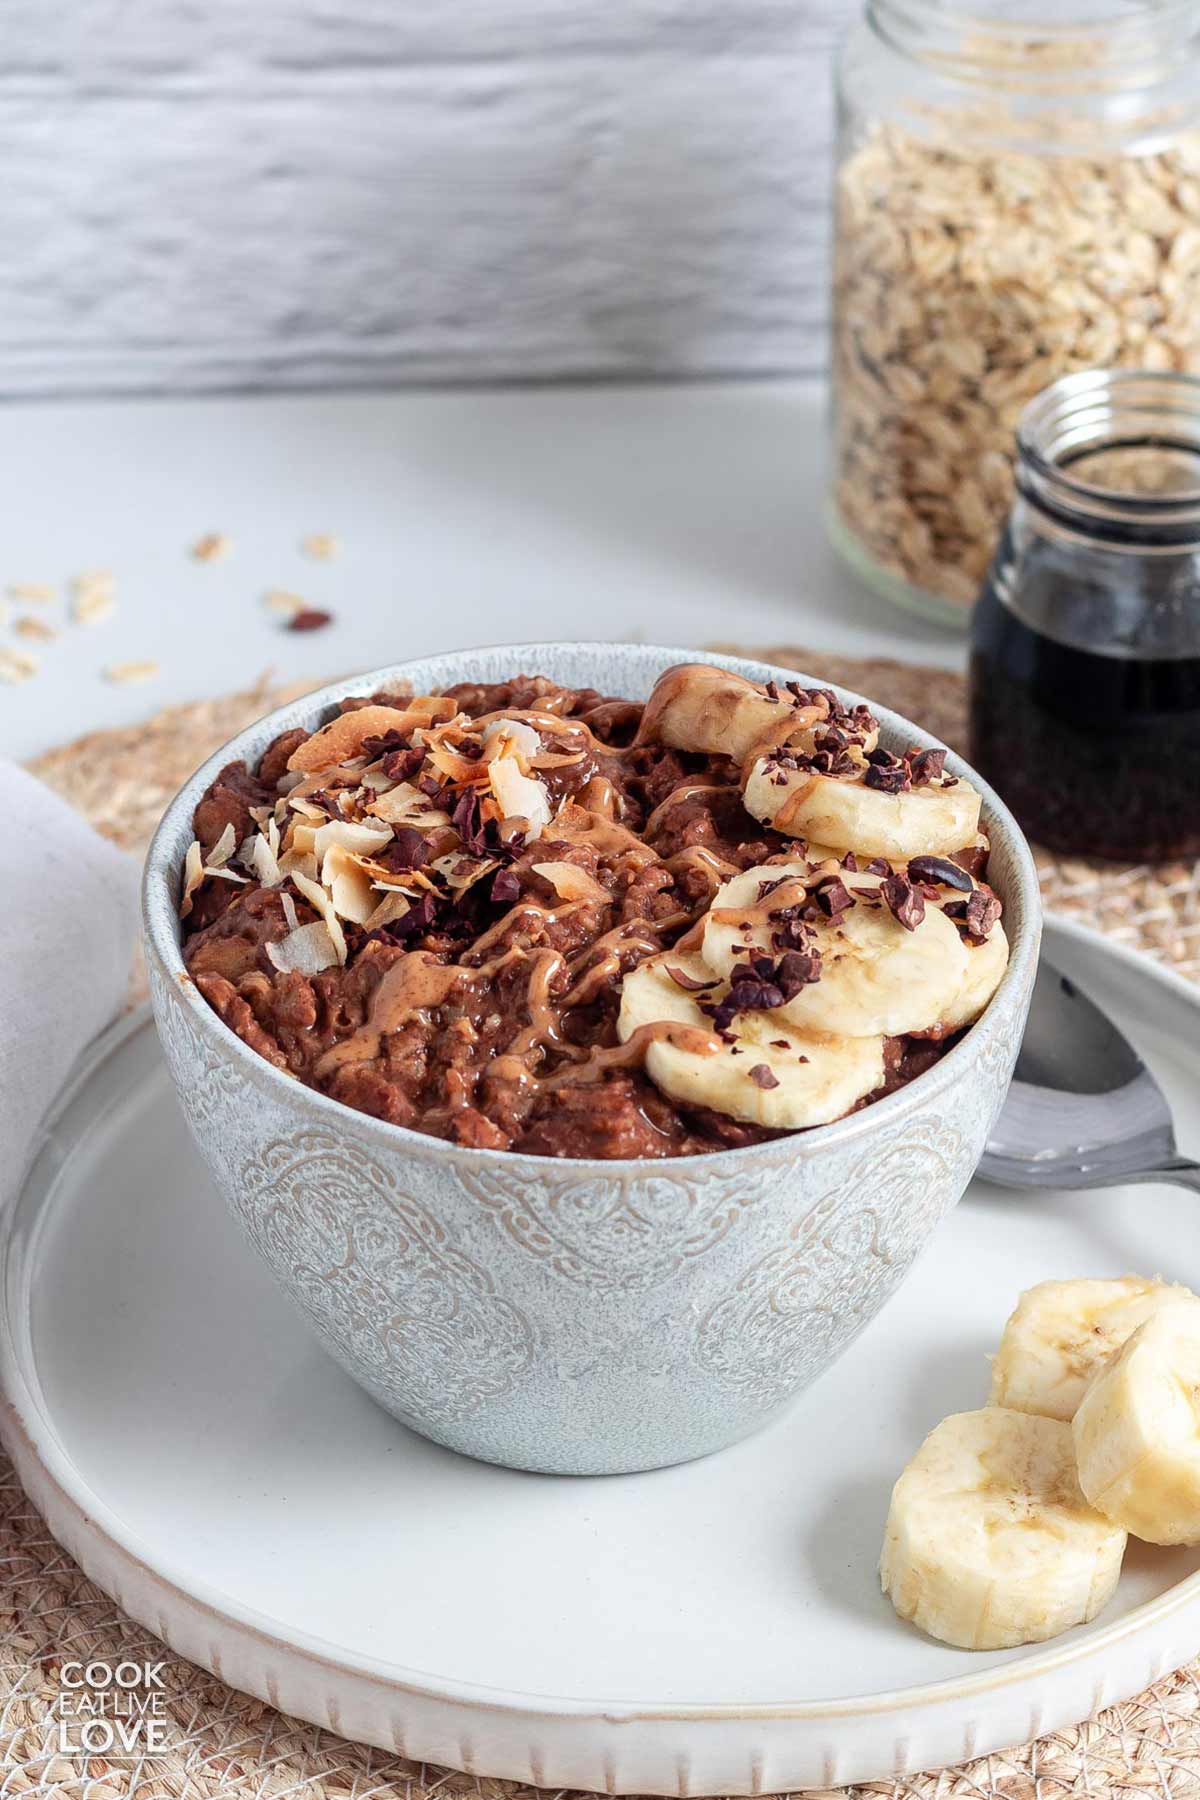 Chocolate oatmeal in a bowl with toppings.